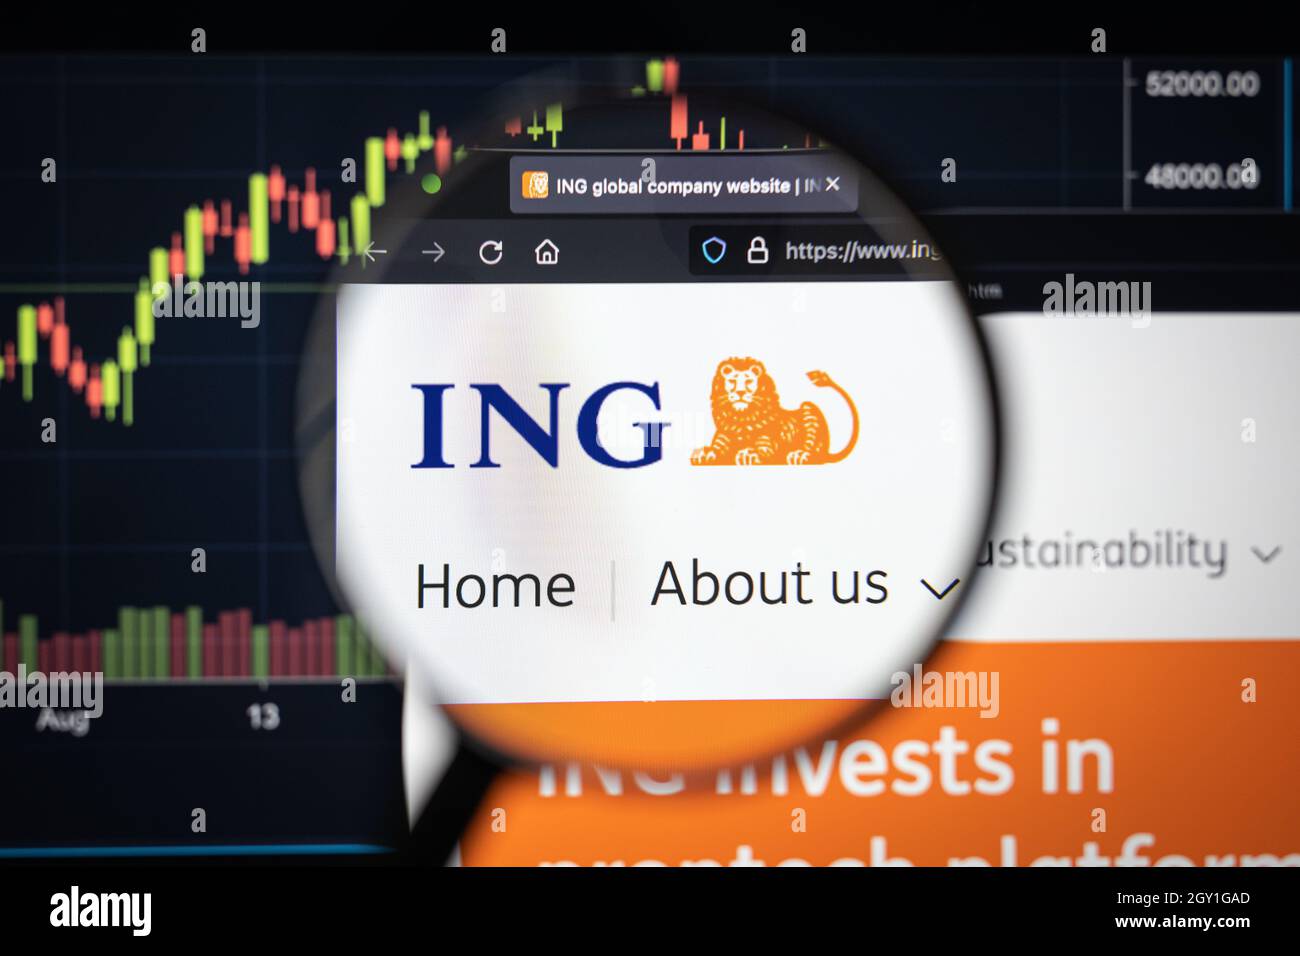 ING-DiBa AG company logo on a website with blurry stock market developments in the background, seen on a computer screen through a magnifying glass Stock Photo